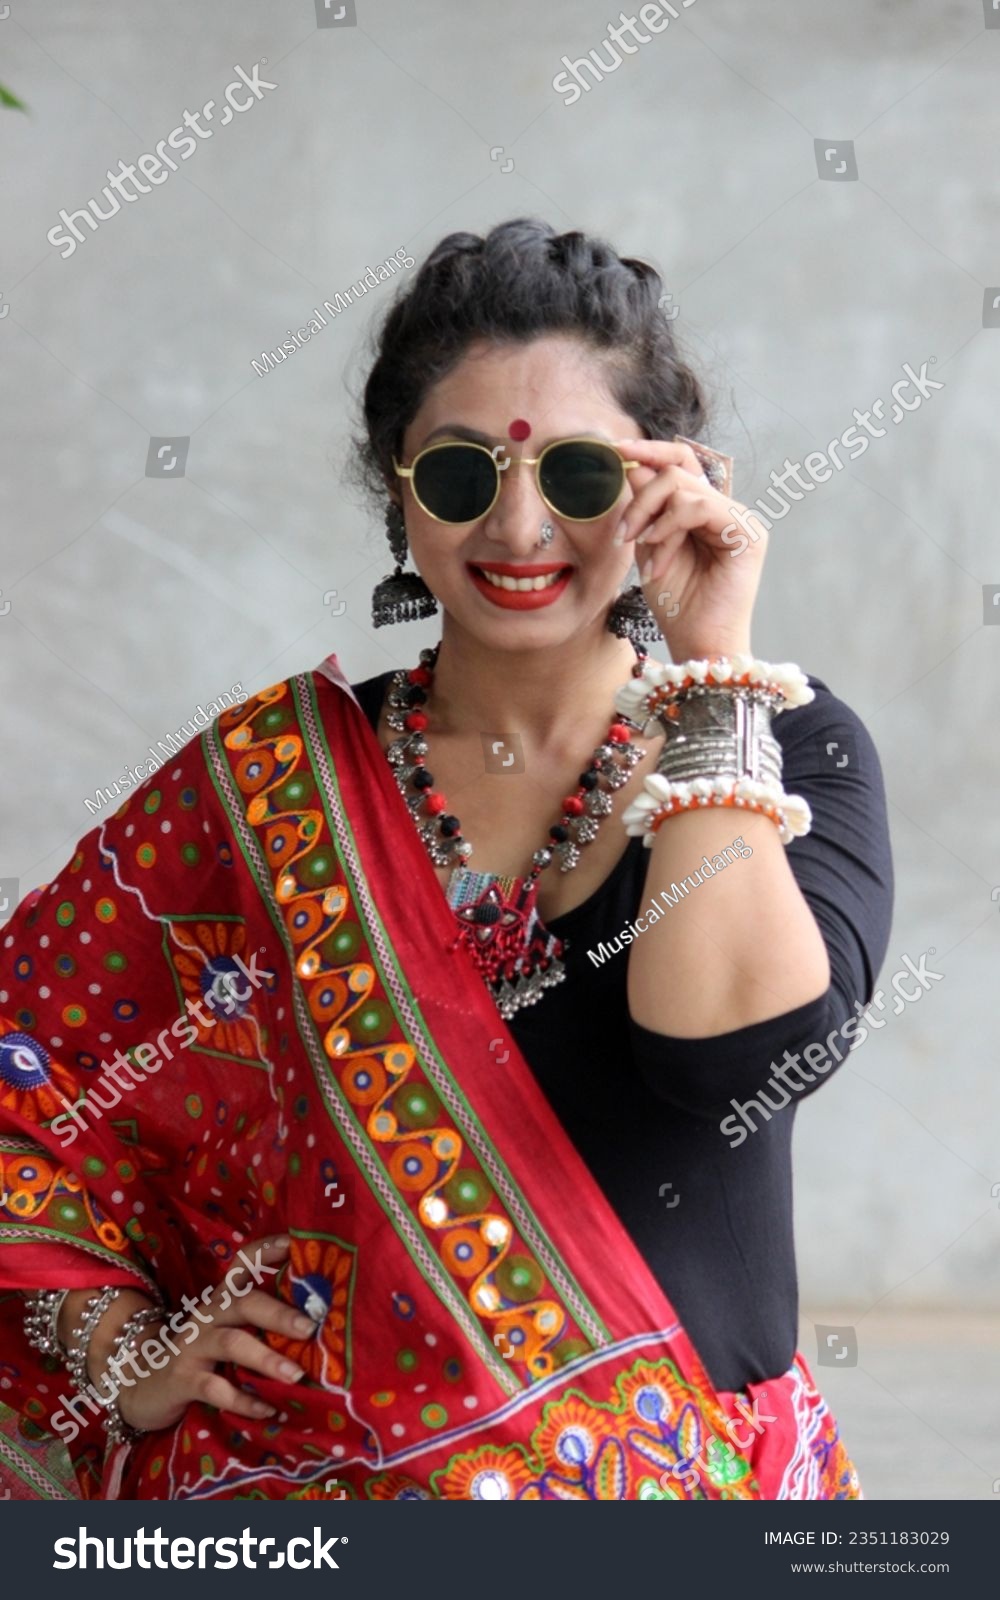 Indian woman in a stylish traditional look for Navratri for playing Garba and dandiya wirh sun glasses and fabric and oxidized jewelry. red and black outfit with traitional bangles earings, bindi. #2351183029